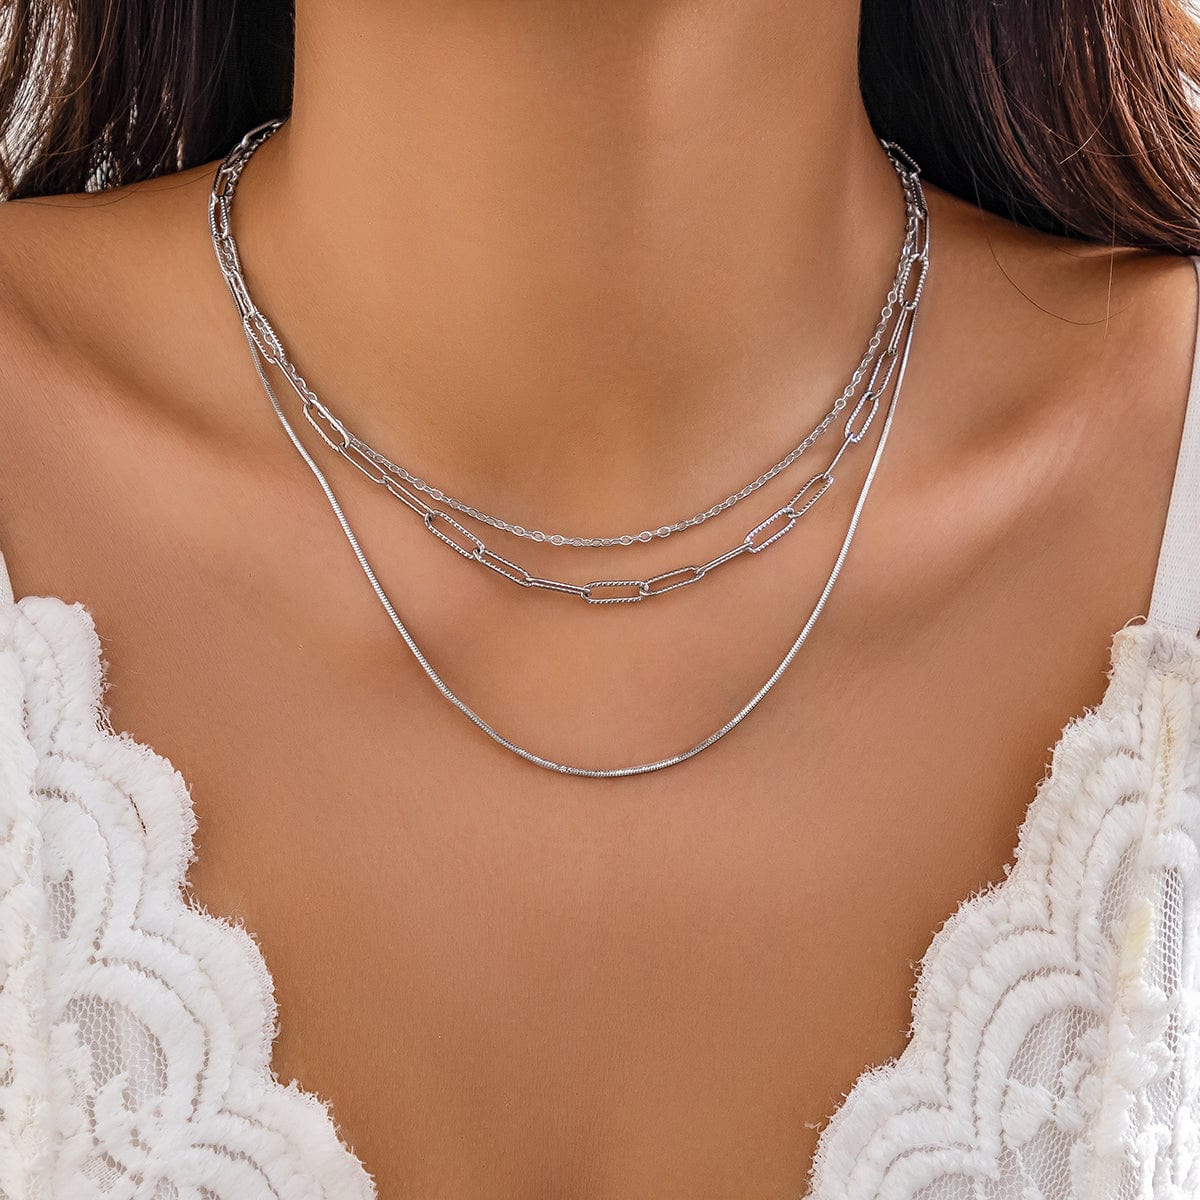 Punk Layered Silver Plated Cable Chain Necklace Set - ArtGalleryZen